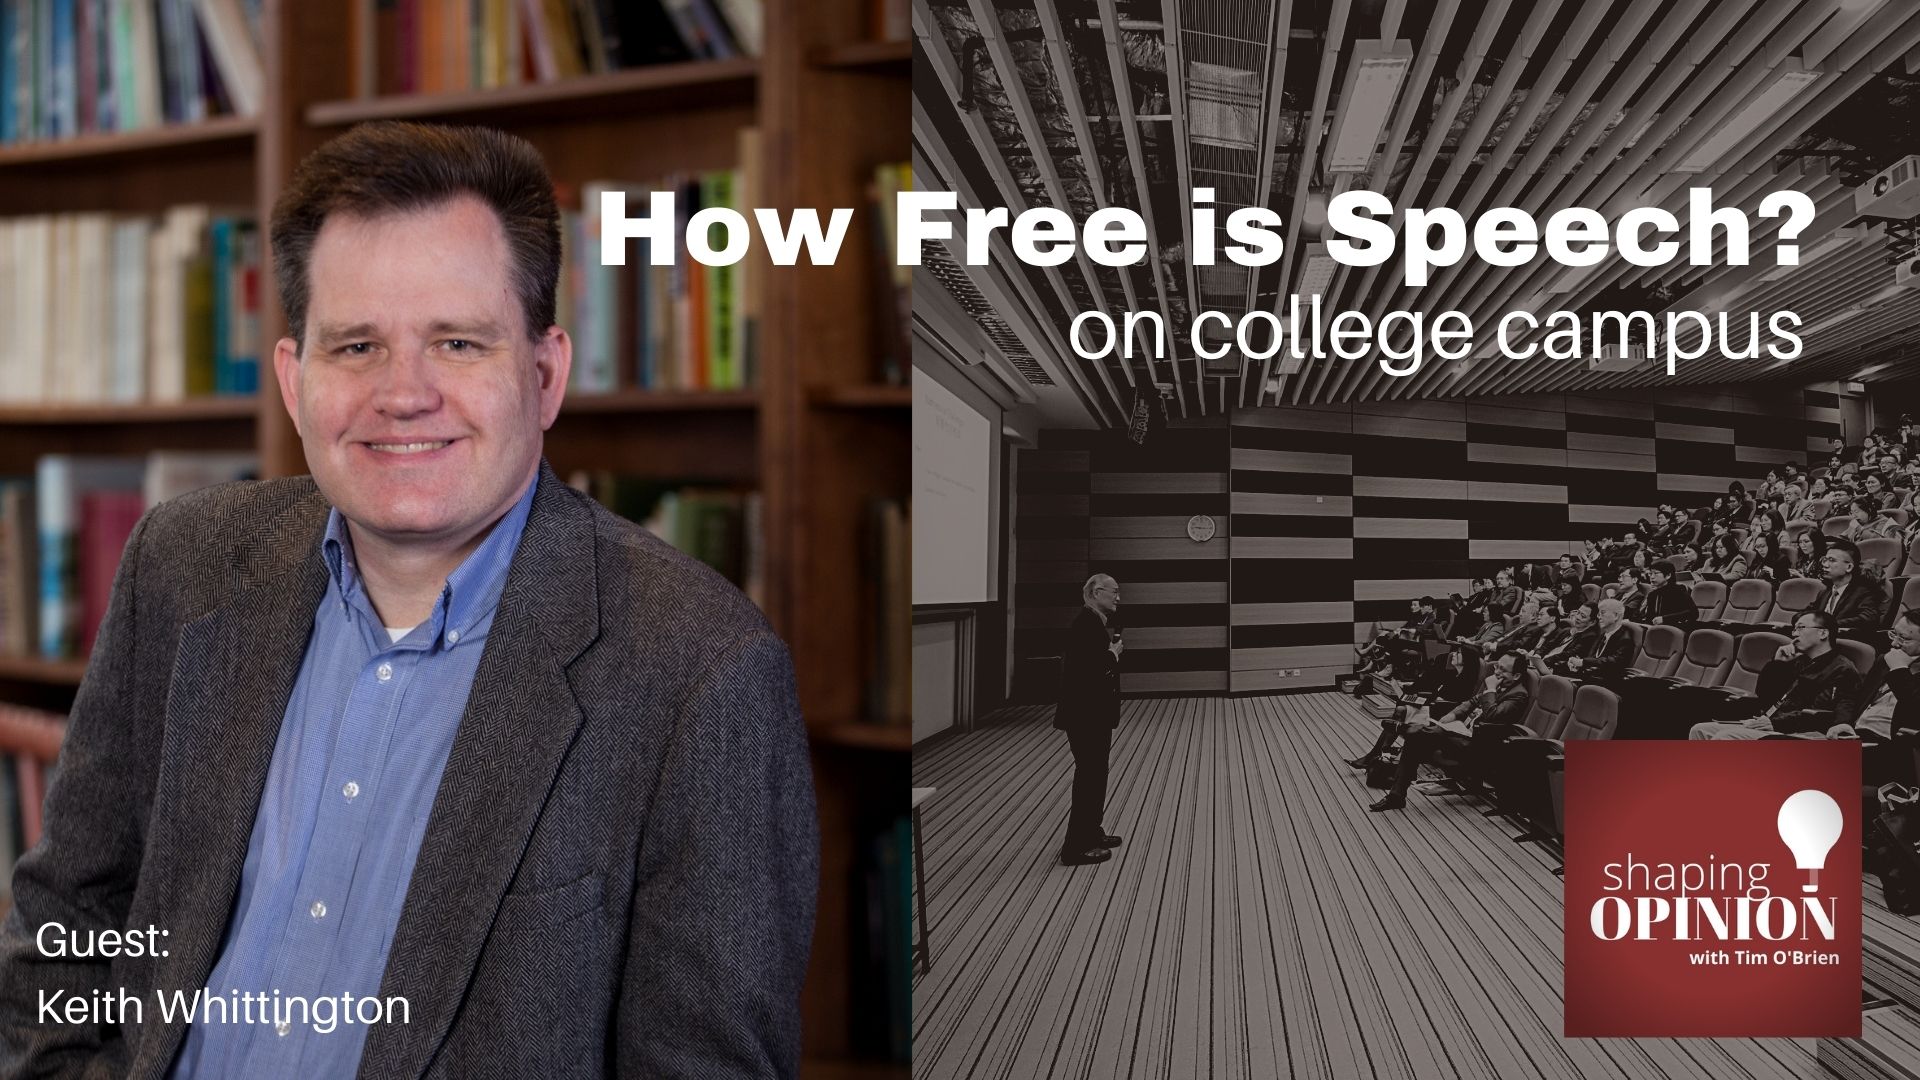 Free speech on college campuses